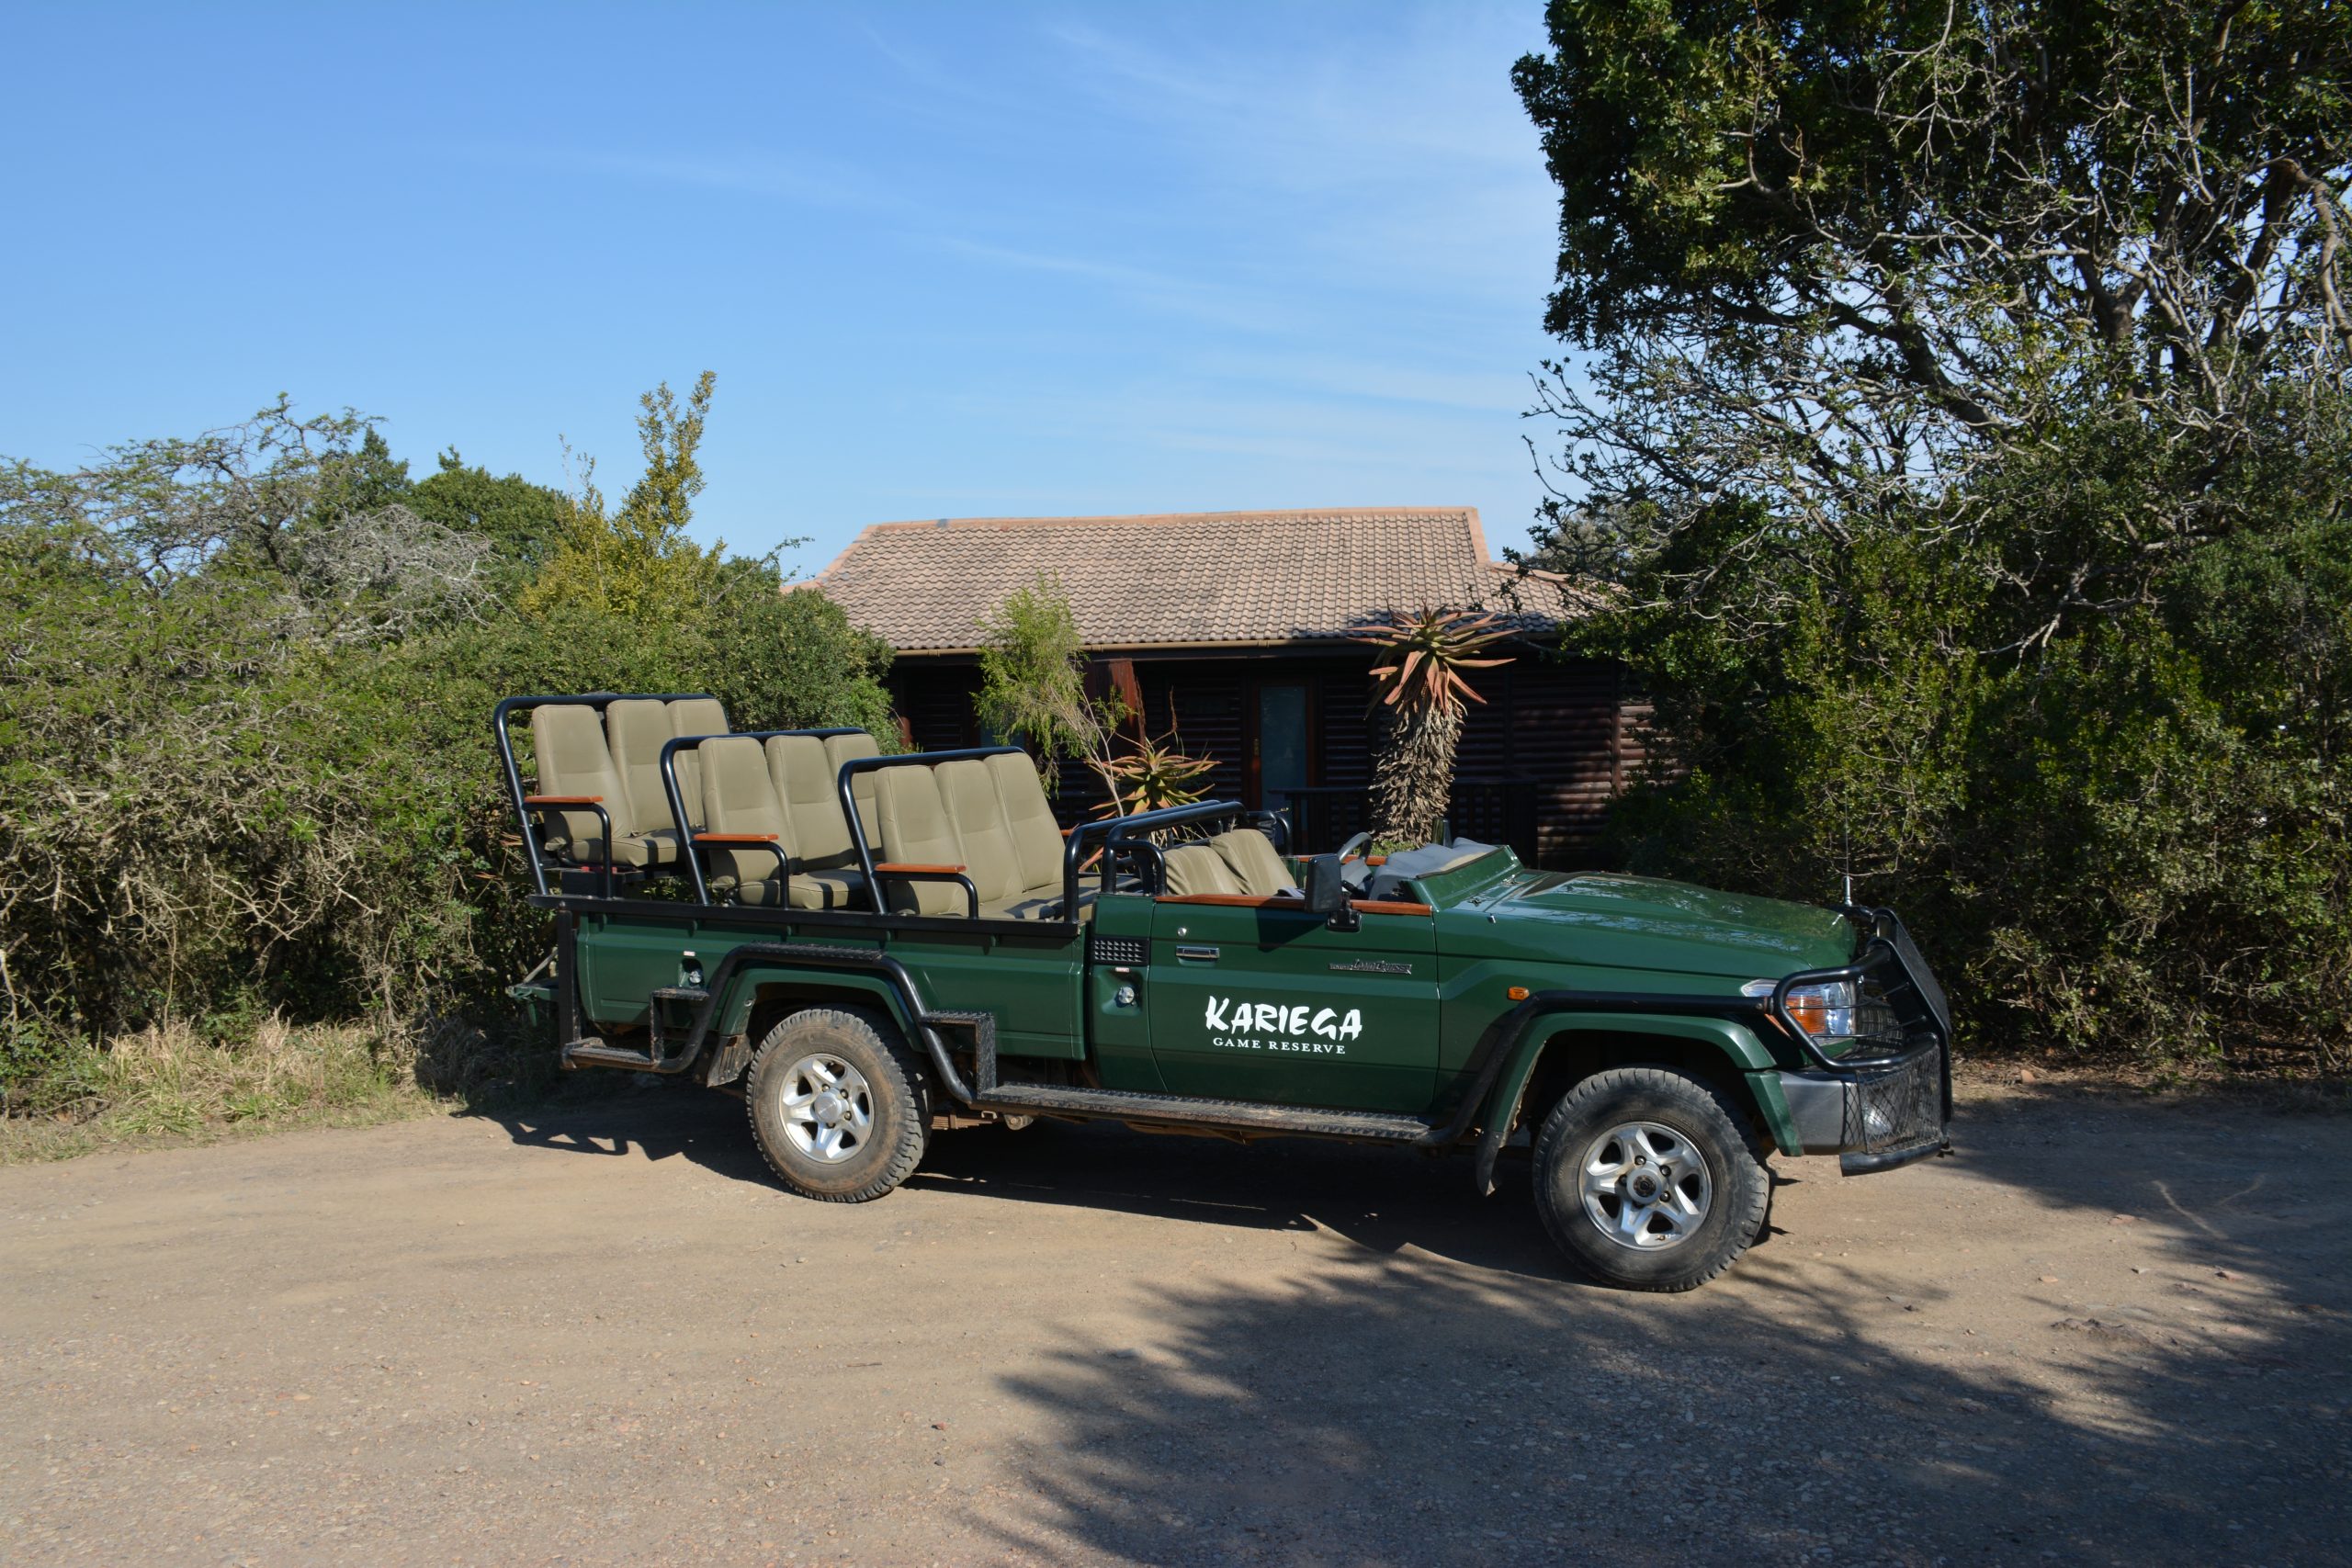 Port Elizabeth – Ukhozi Game Reserve, and “what the heck is a game reserve?!?”